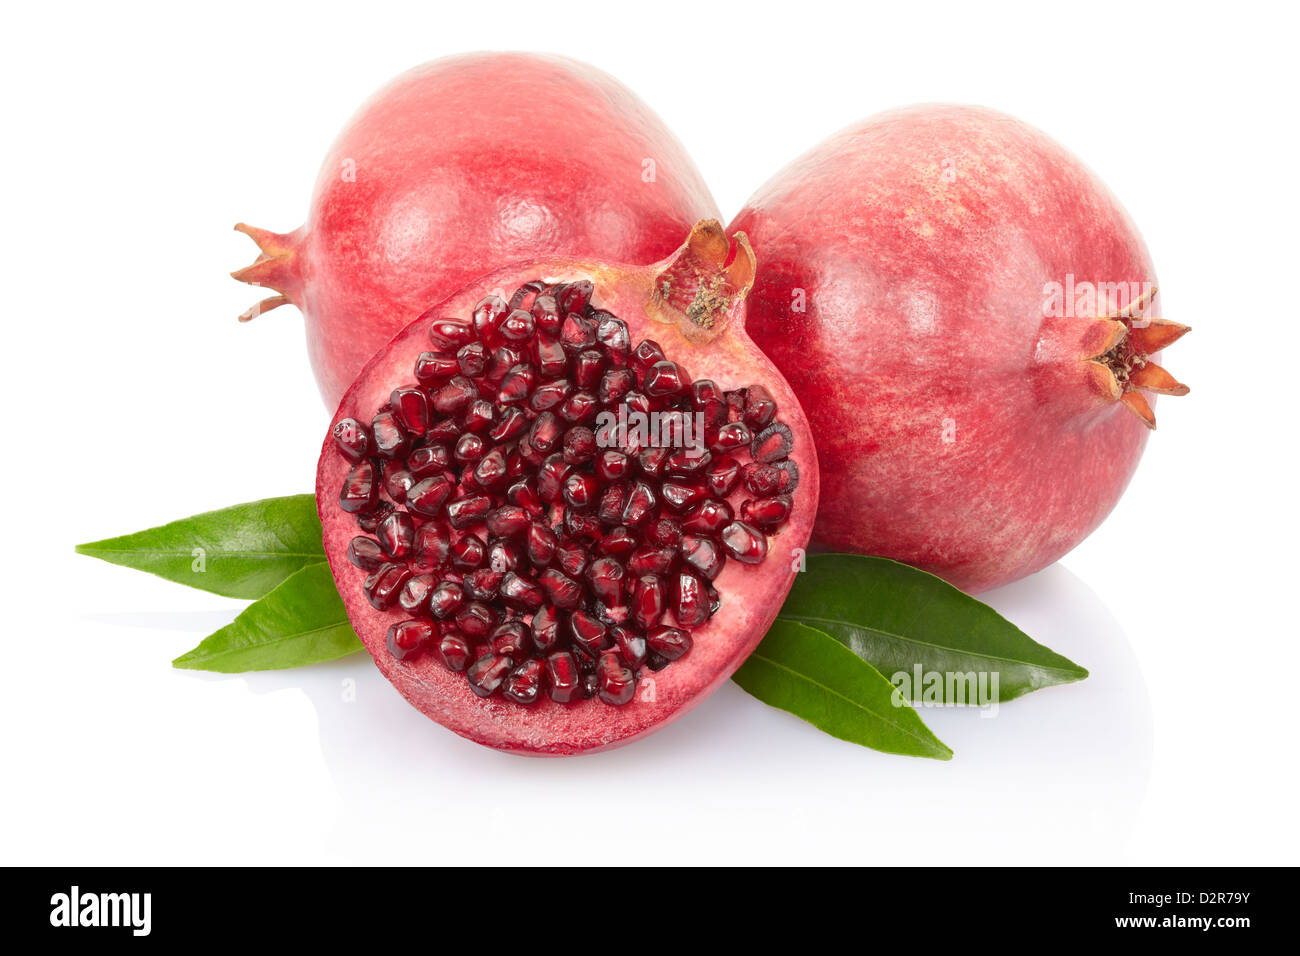 Pomegranate and section with leaves Stock Photo